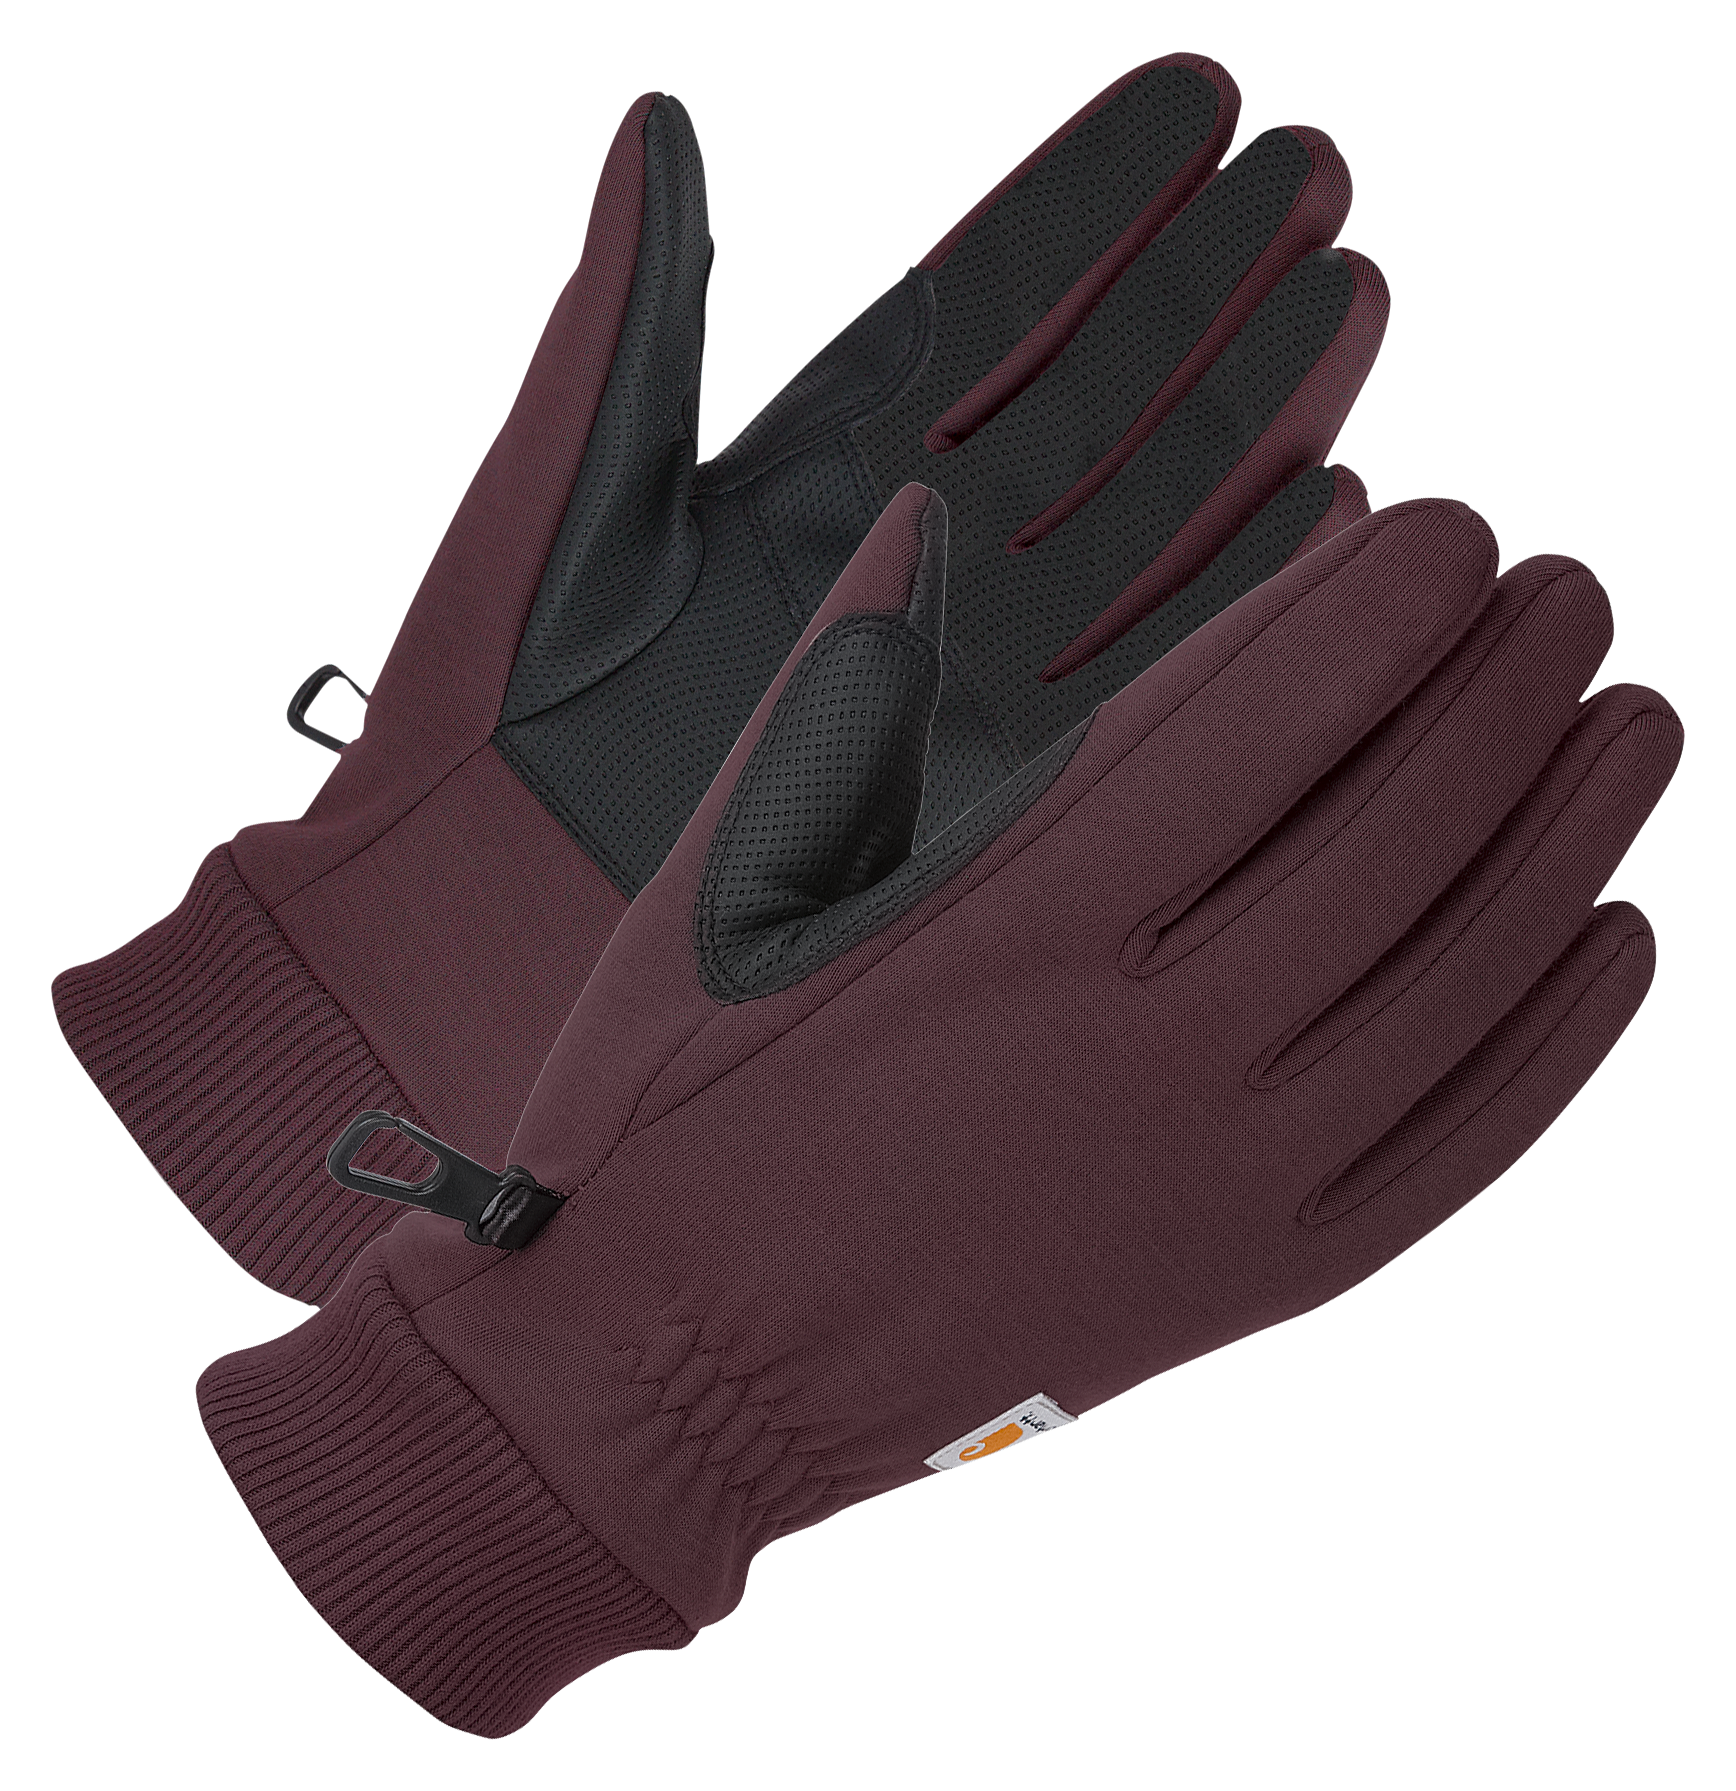 Carhartt C-Touch Knit Gloves for Ladies - Blackberry - M